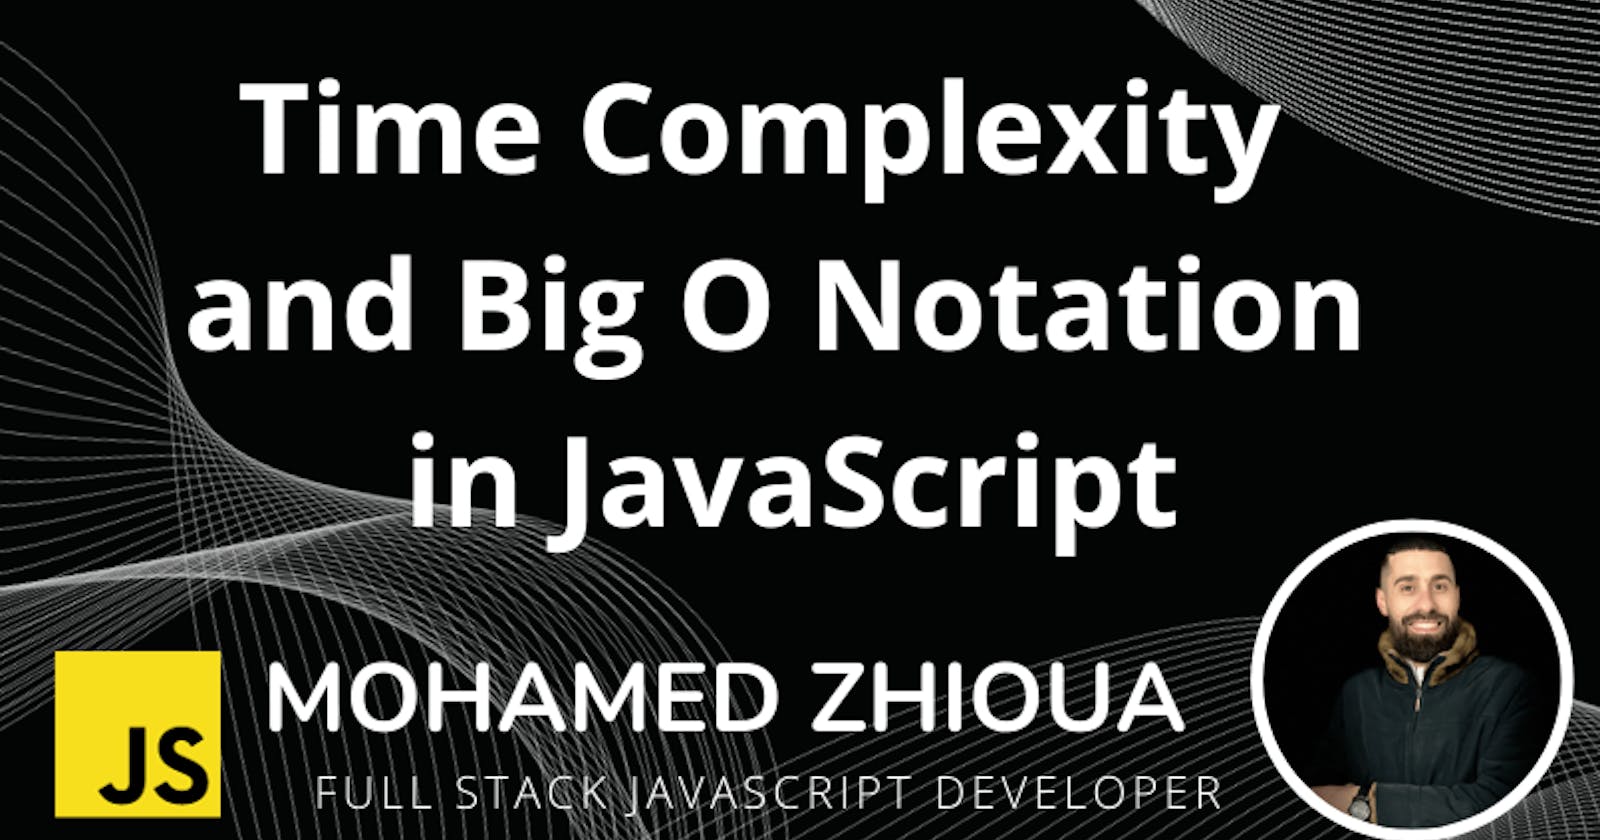 Time Complexity and Big O Notation in JavaScript